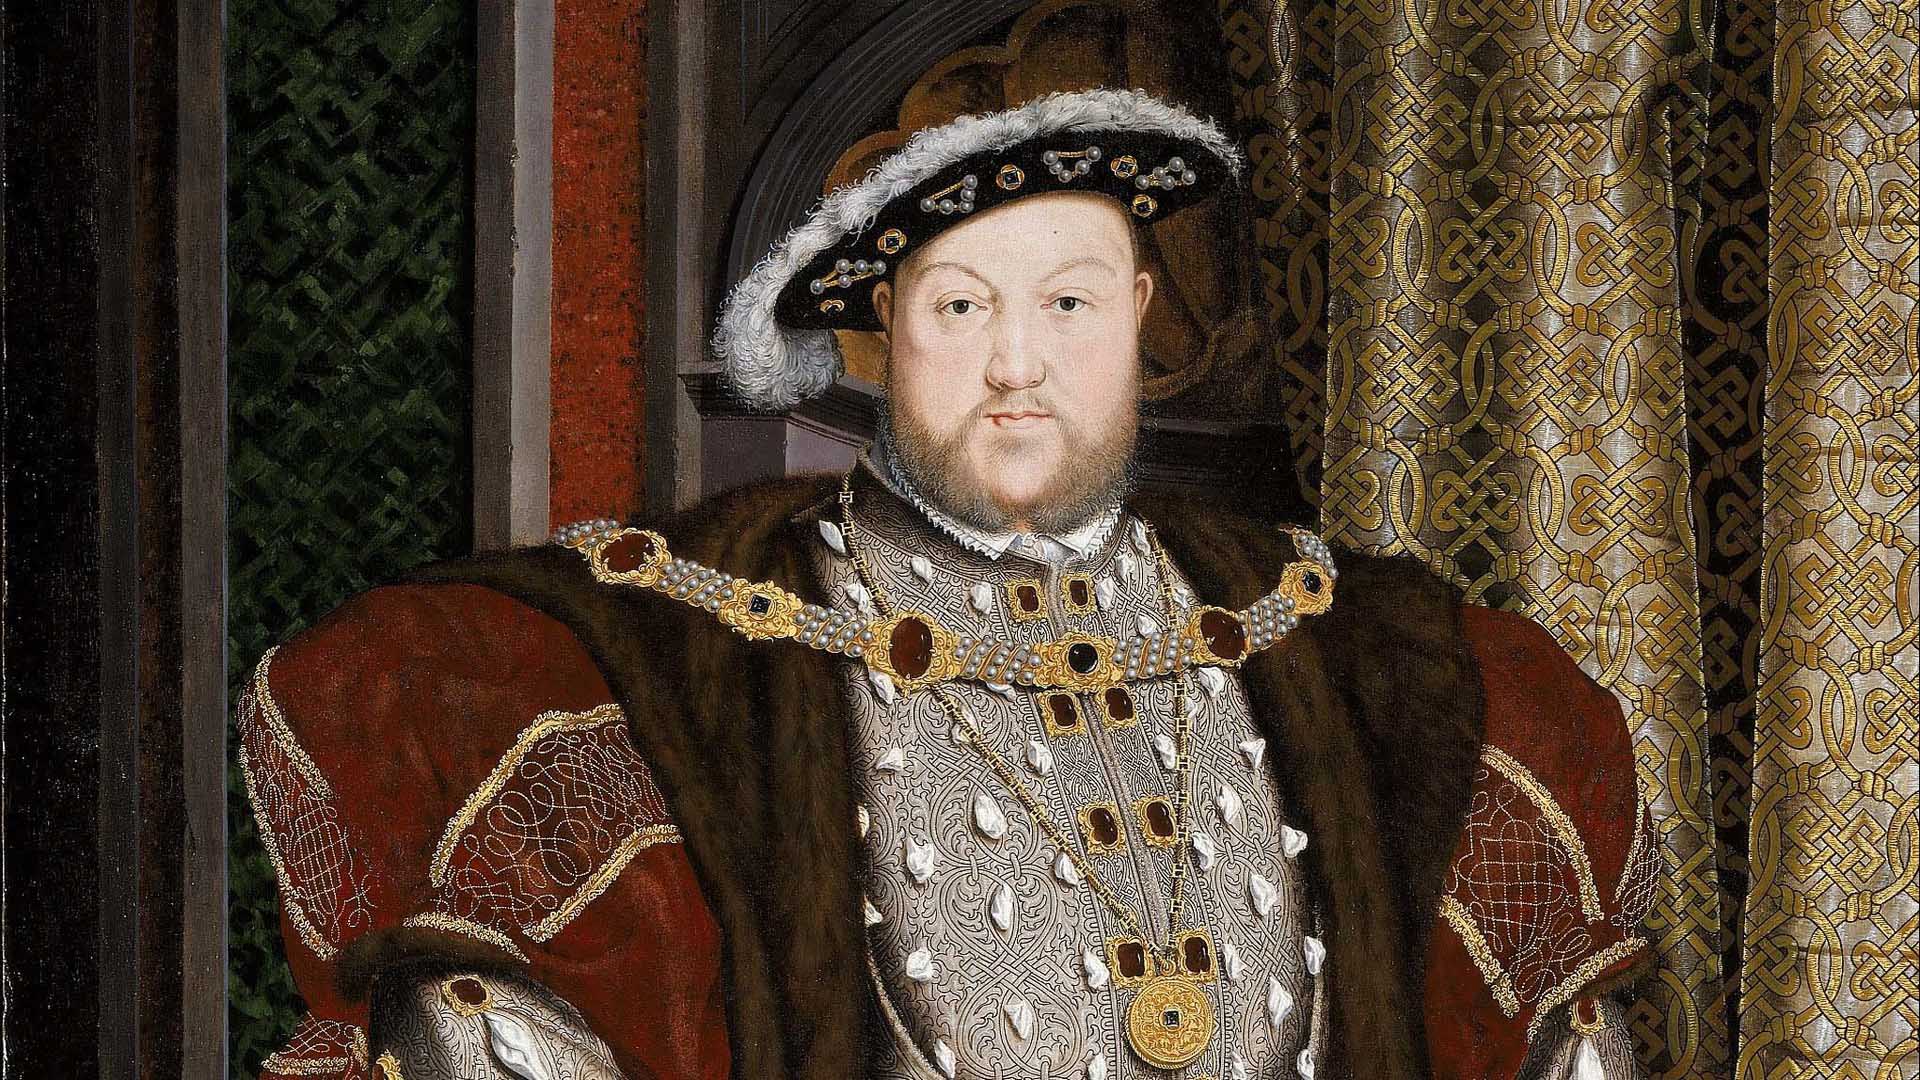 The unusual forward-facing effigy that appeared on Henry VIII's Testoons bears similarities to this arresting portrait of the king after Hans Holbein's lost original. From the collection of the Walker Art Gallery.